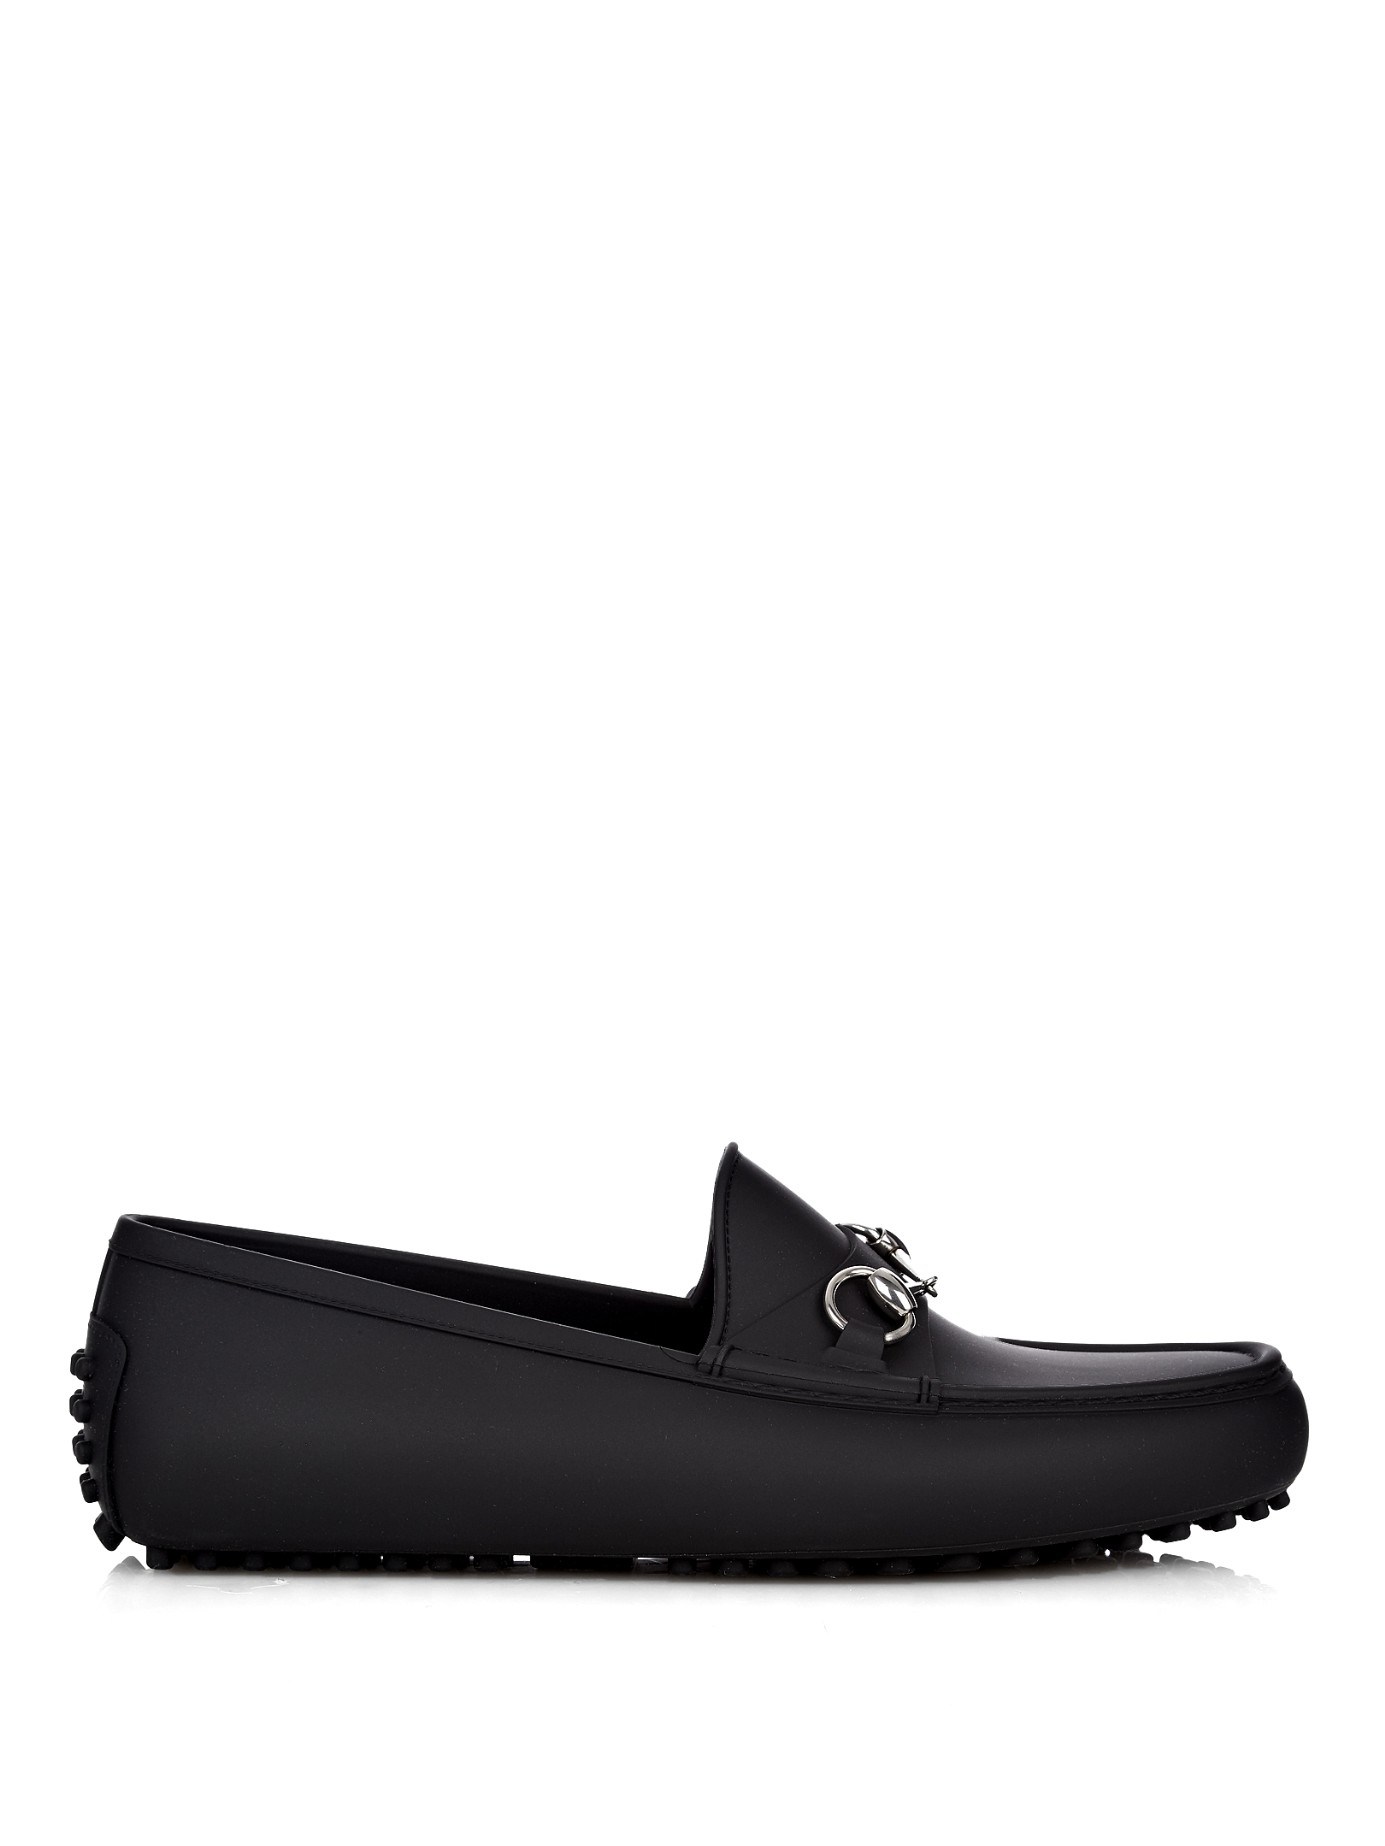 Gucci Horsebit Rubber Driving Shoes in Black for Men - Lyst